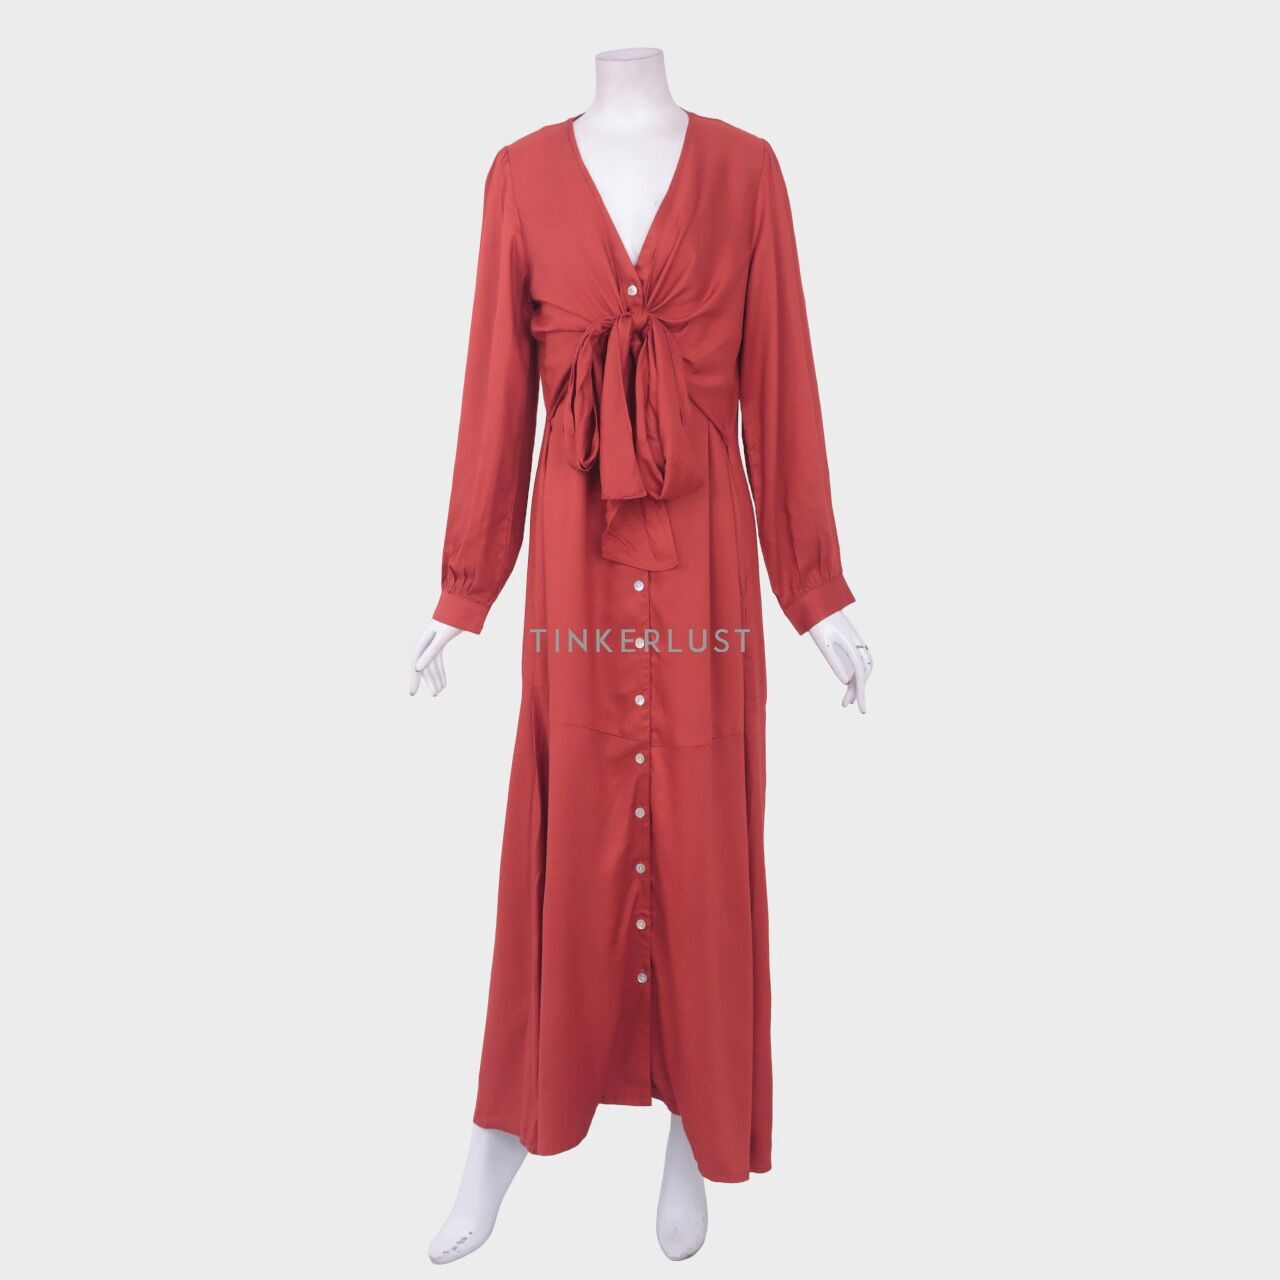 Eesome Brick Red Long Dress